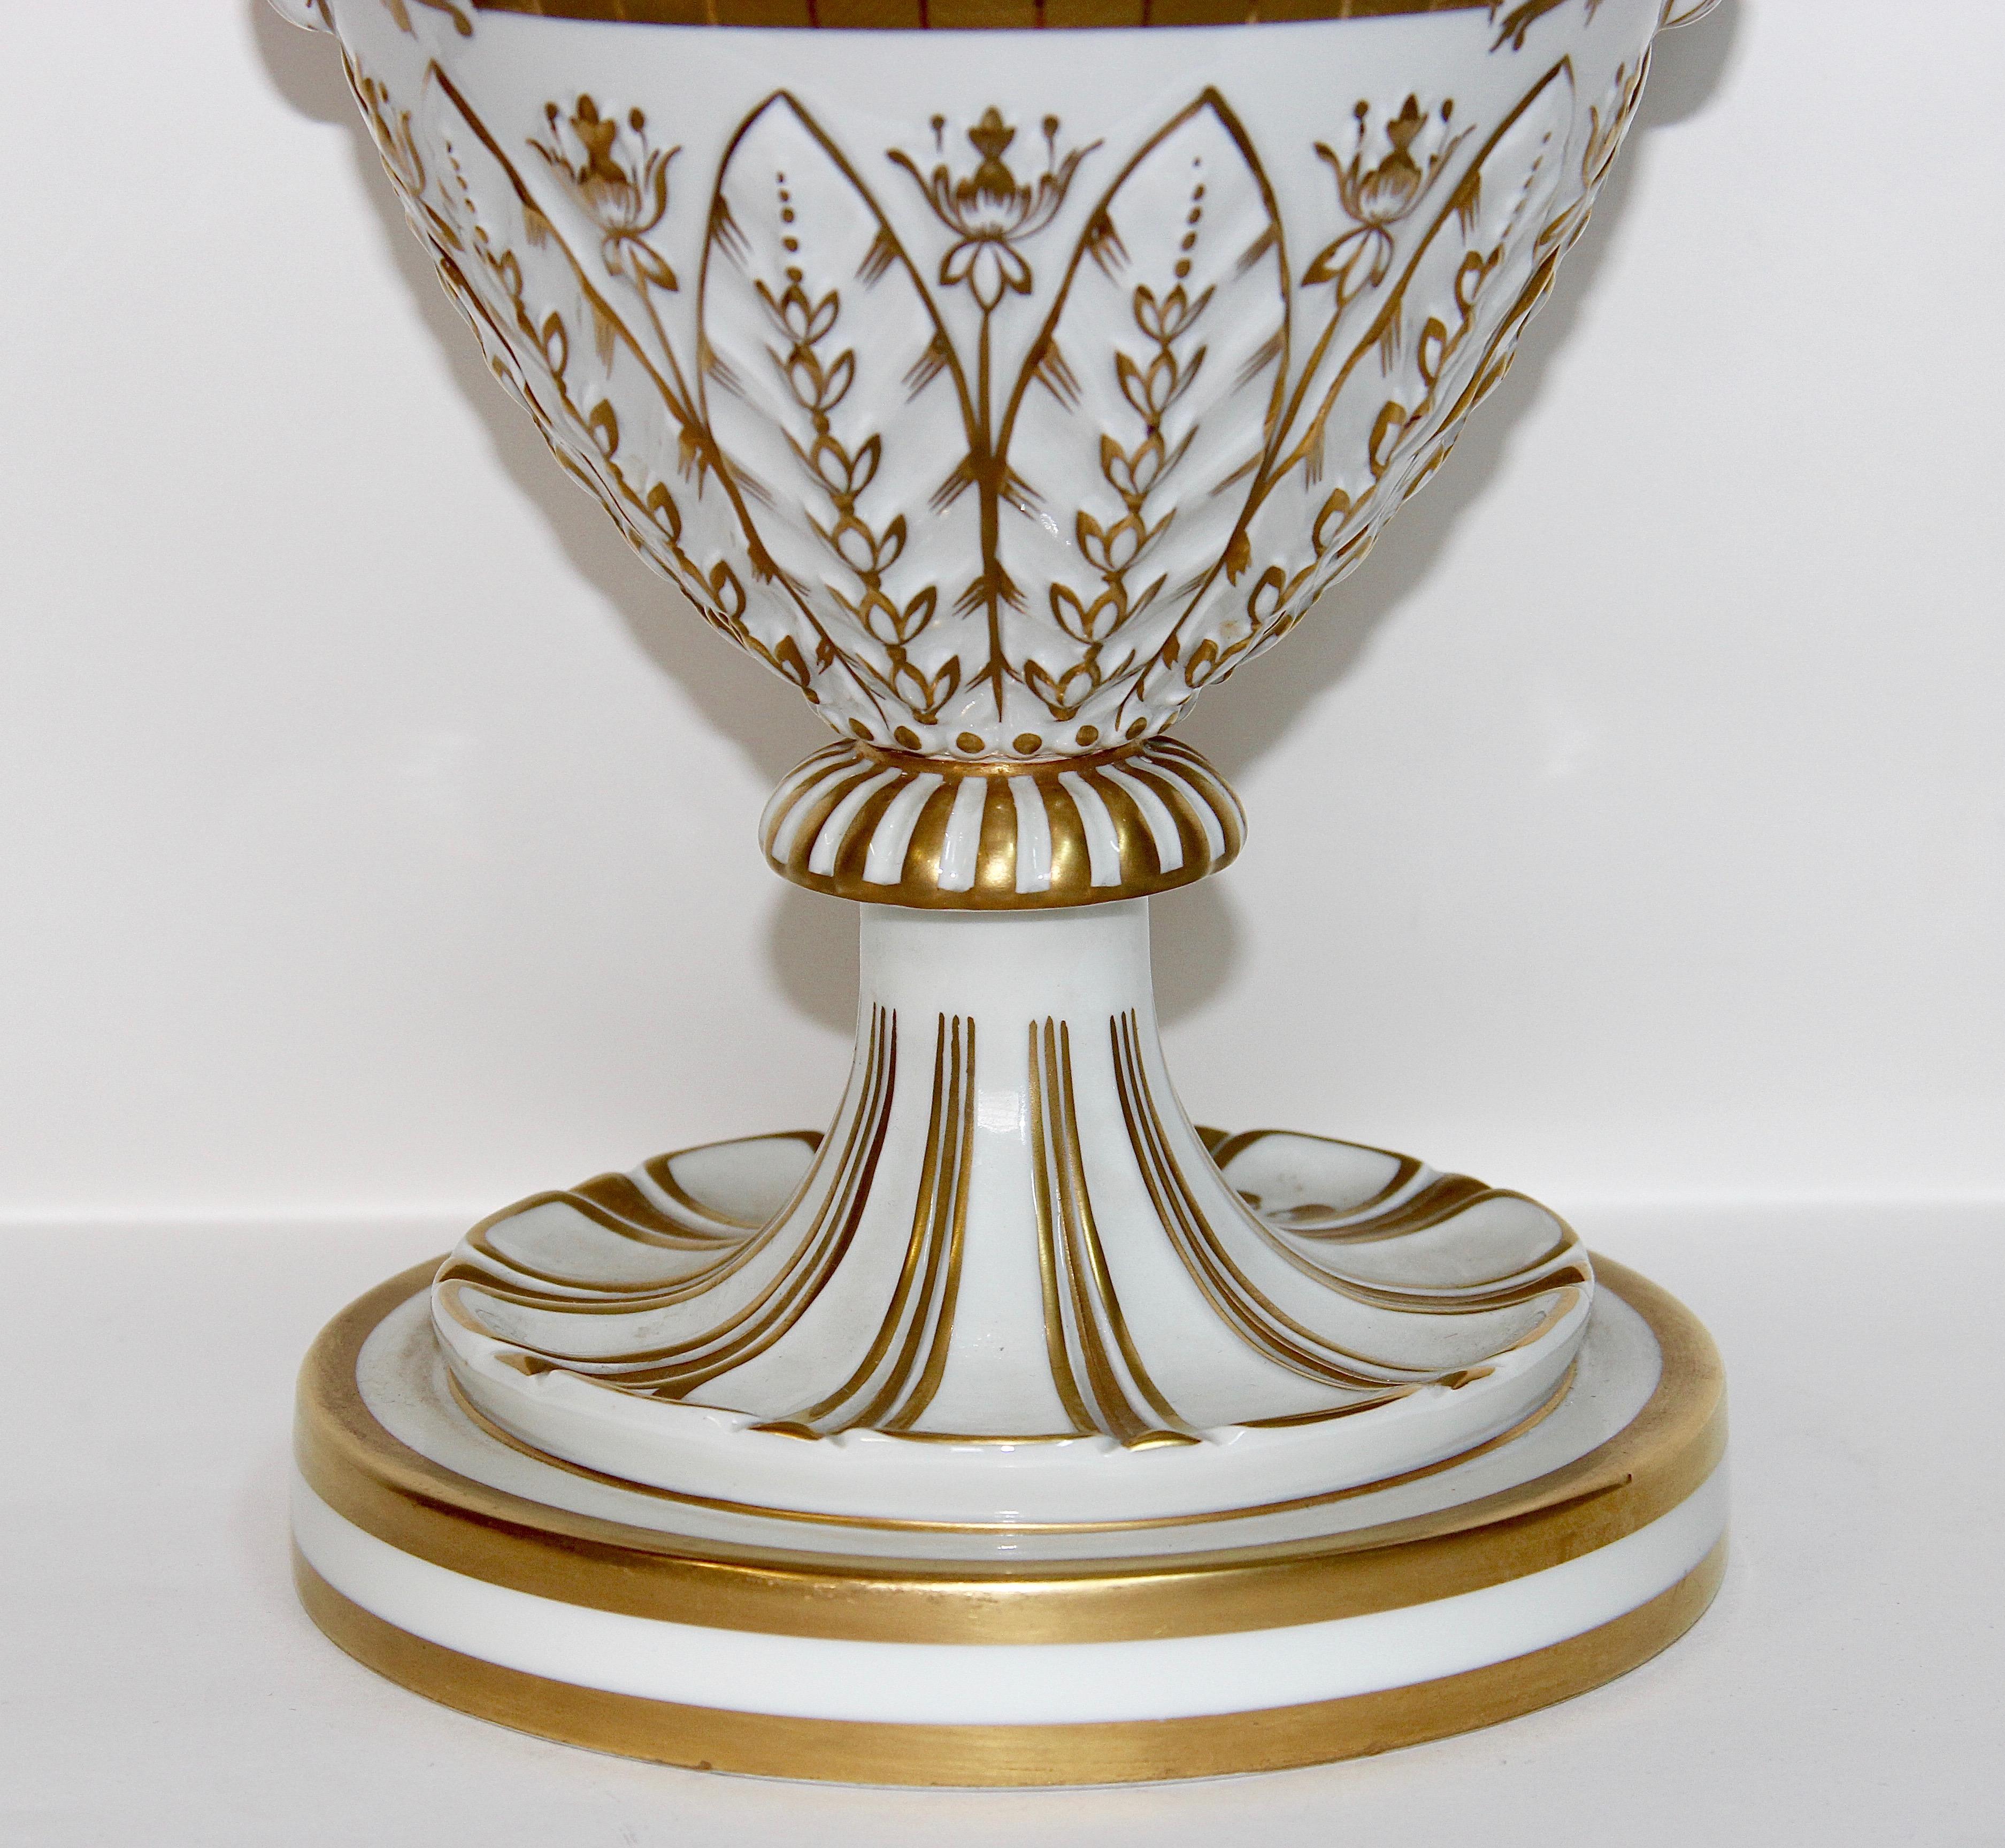 Dresden Porcelain, Amphora, Lid Vase, Urn, with Gold Painting In Good Condition For Sale In Berlin, DE